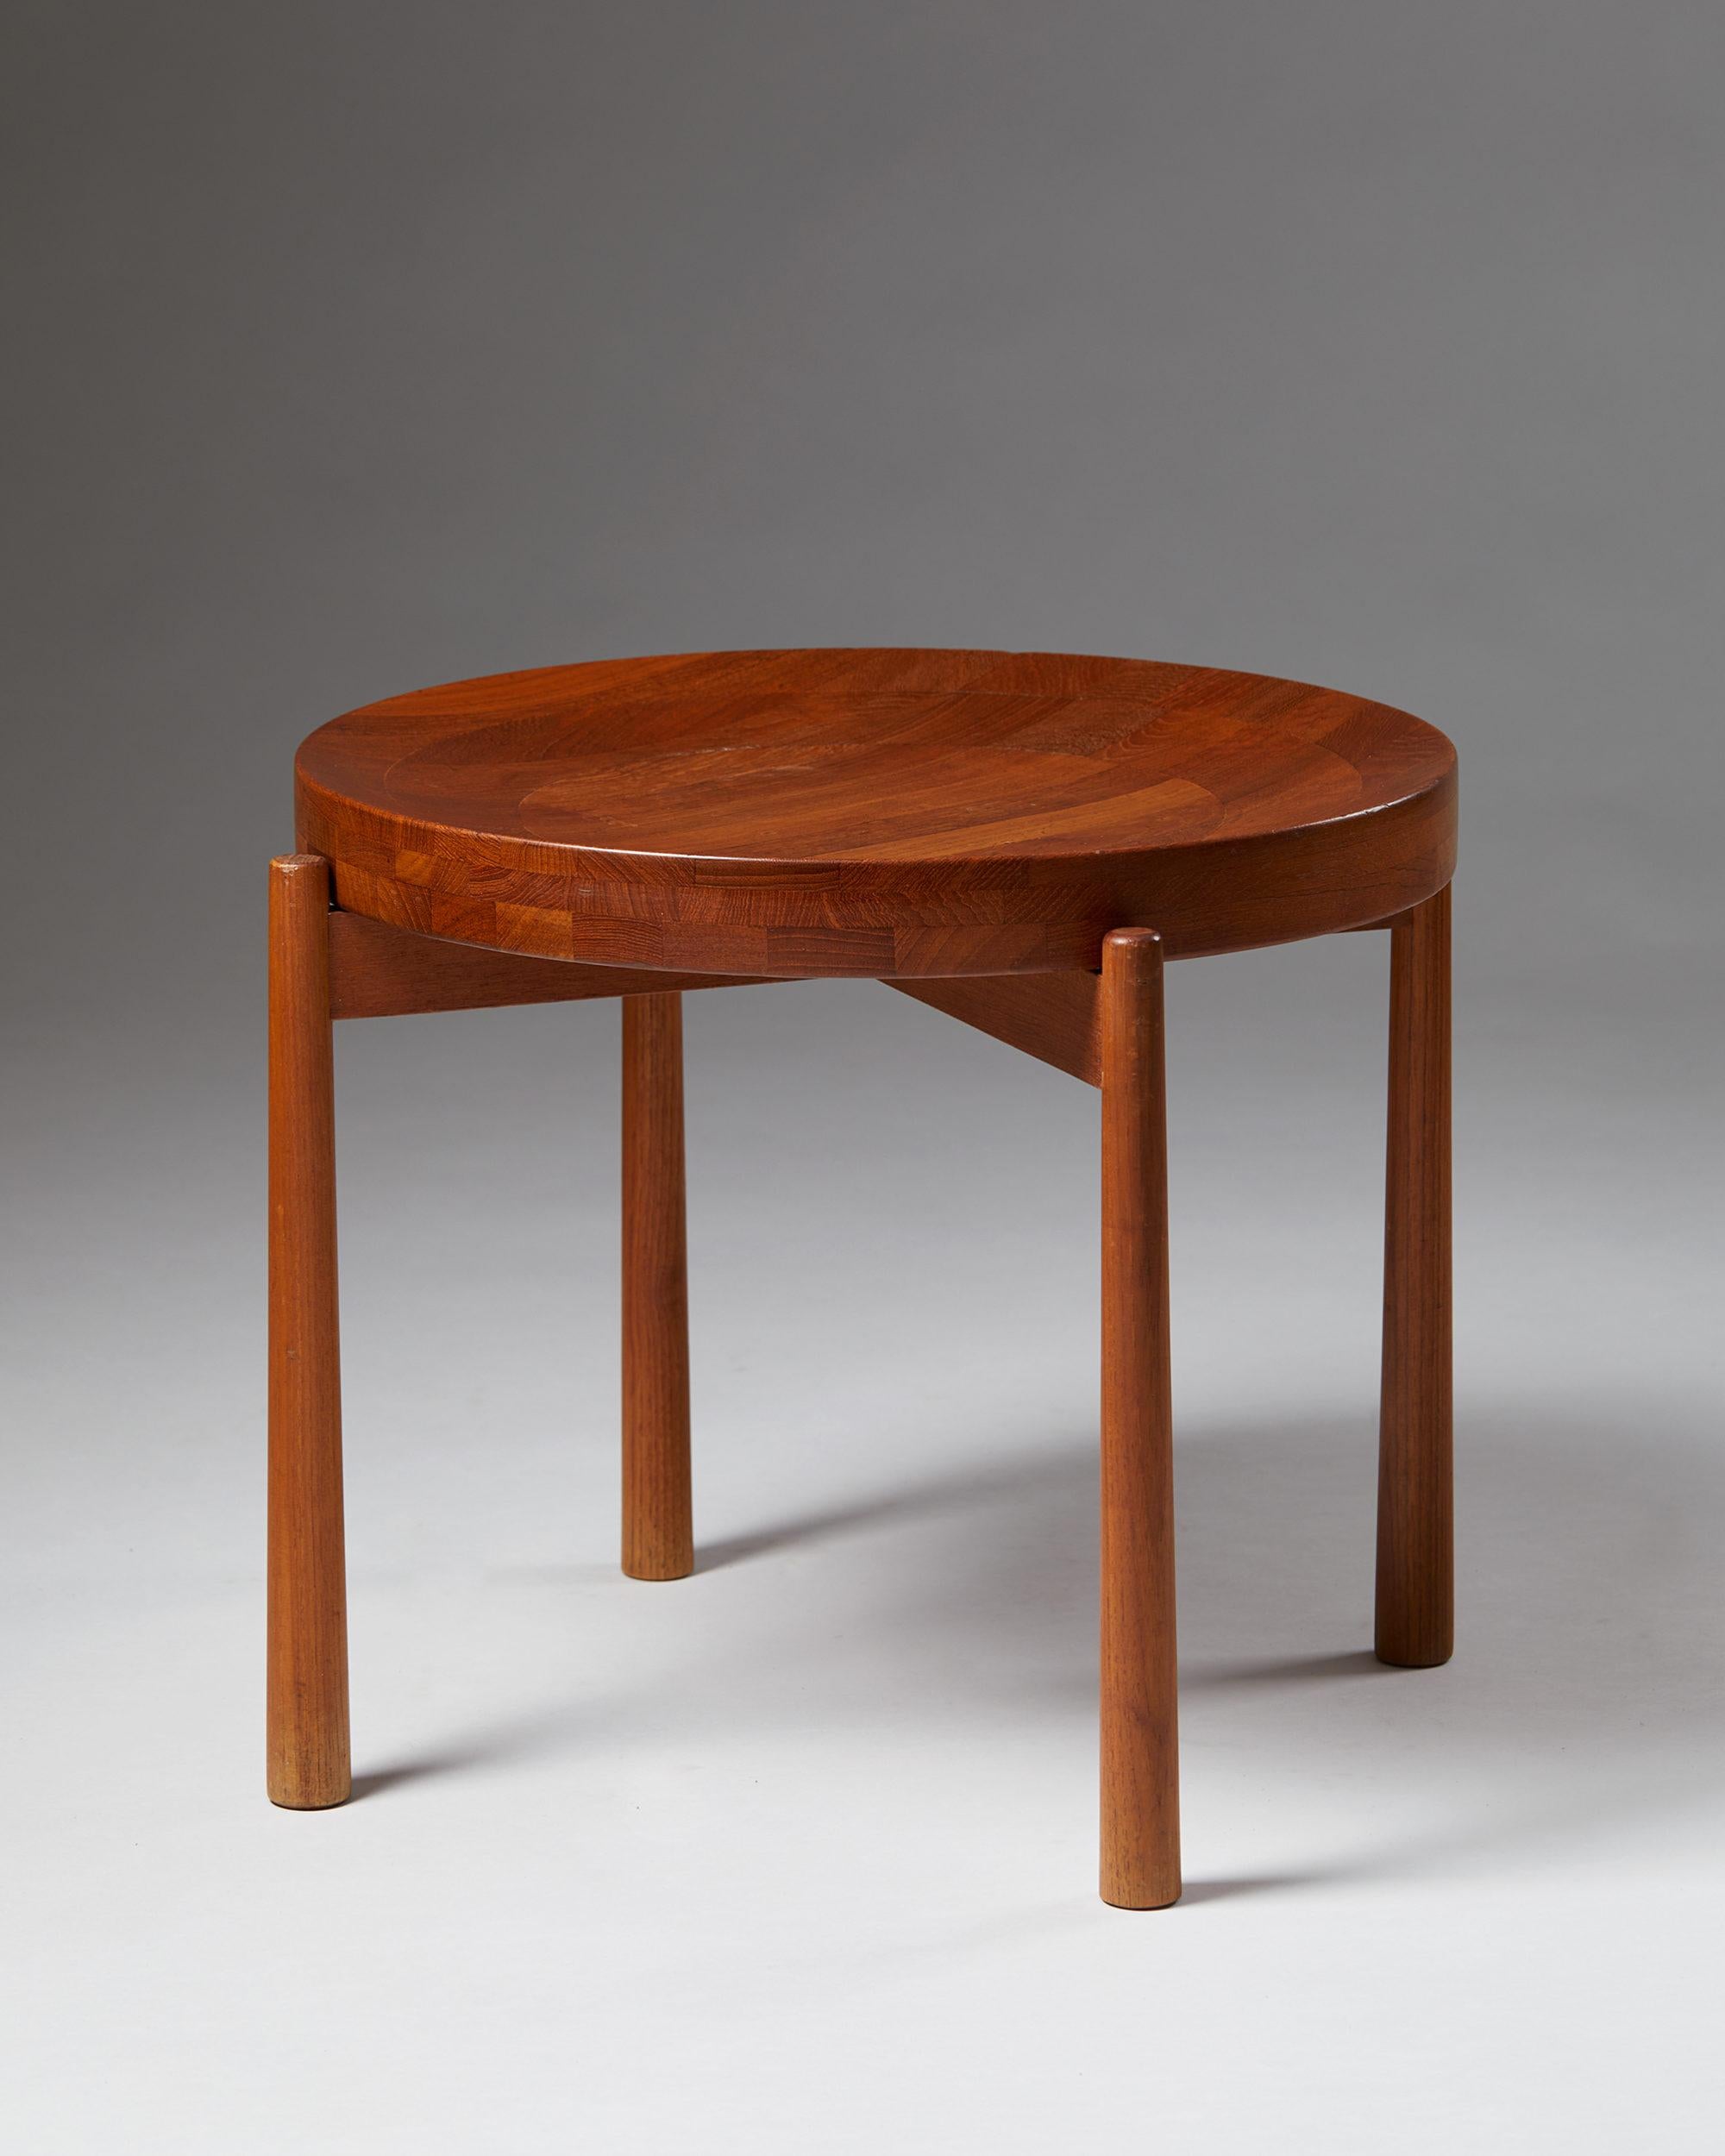 Scandinavian Modern Occasional Table/Tray Table Designed by Jens H Quistgaard, Denmark, 1950s